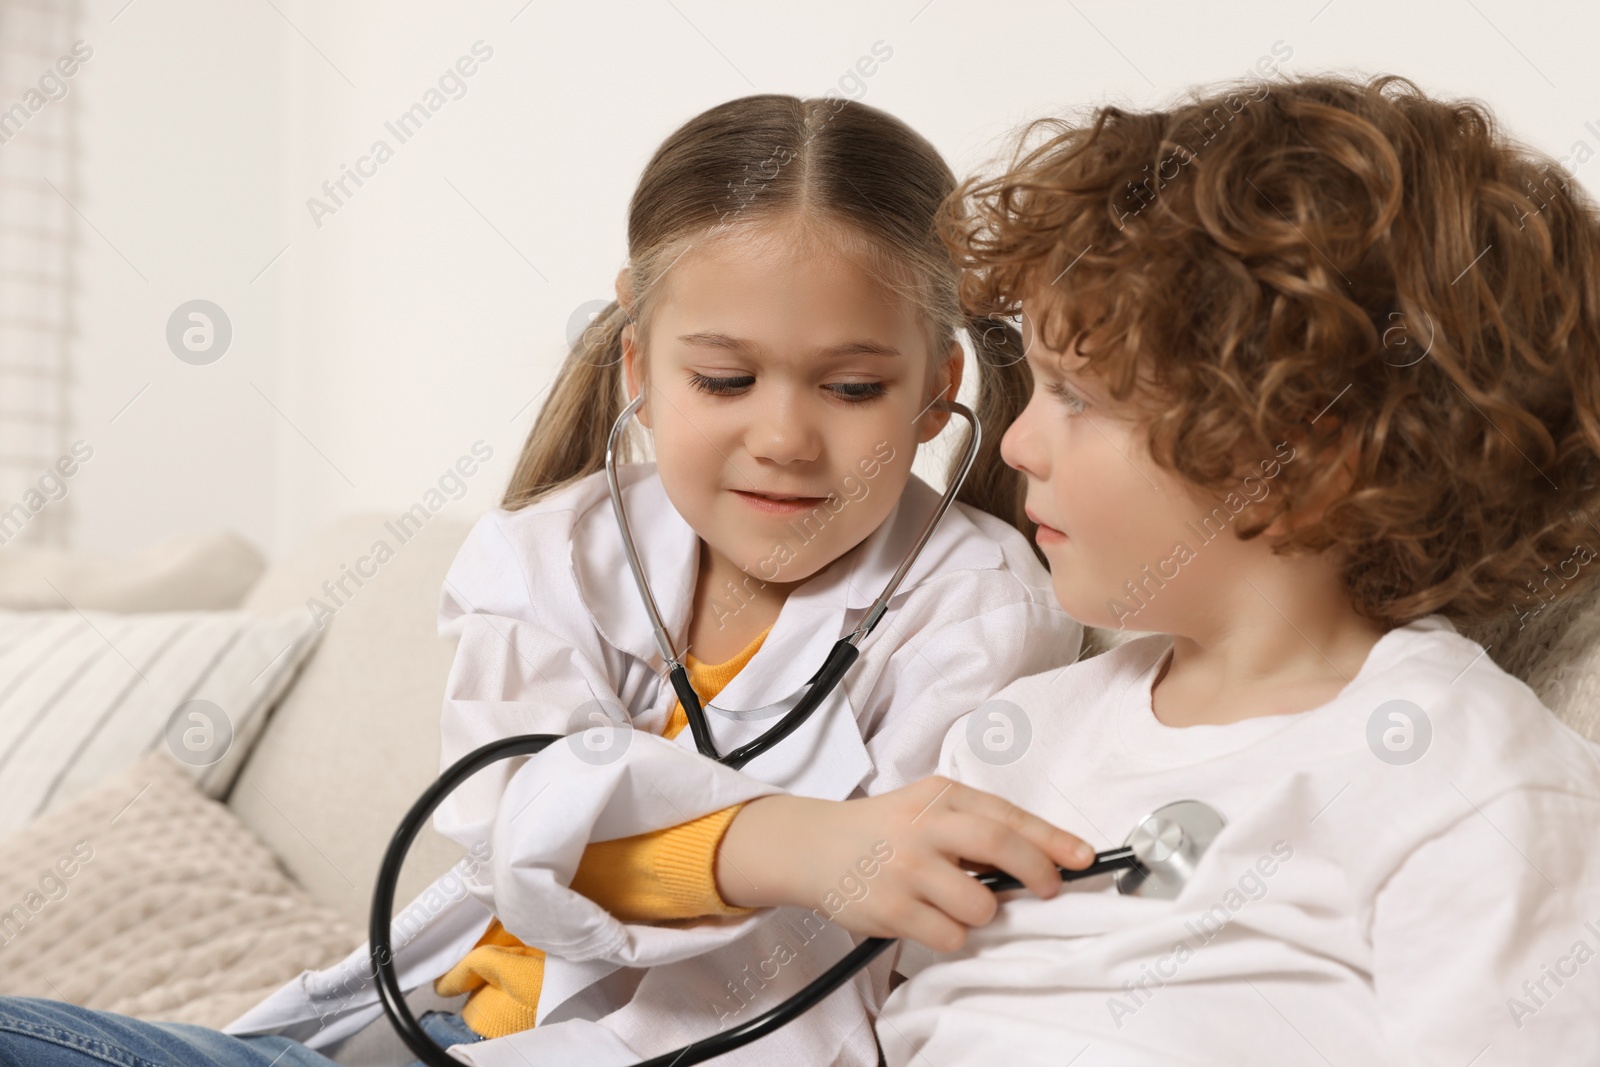 Photo of Little girl playing doctor with her friend at home